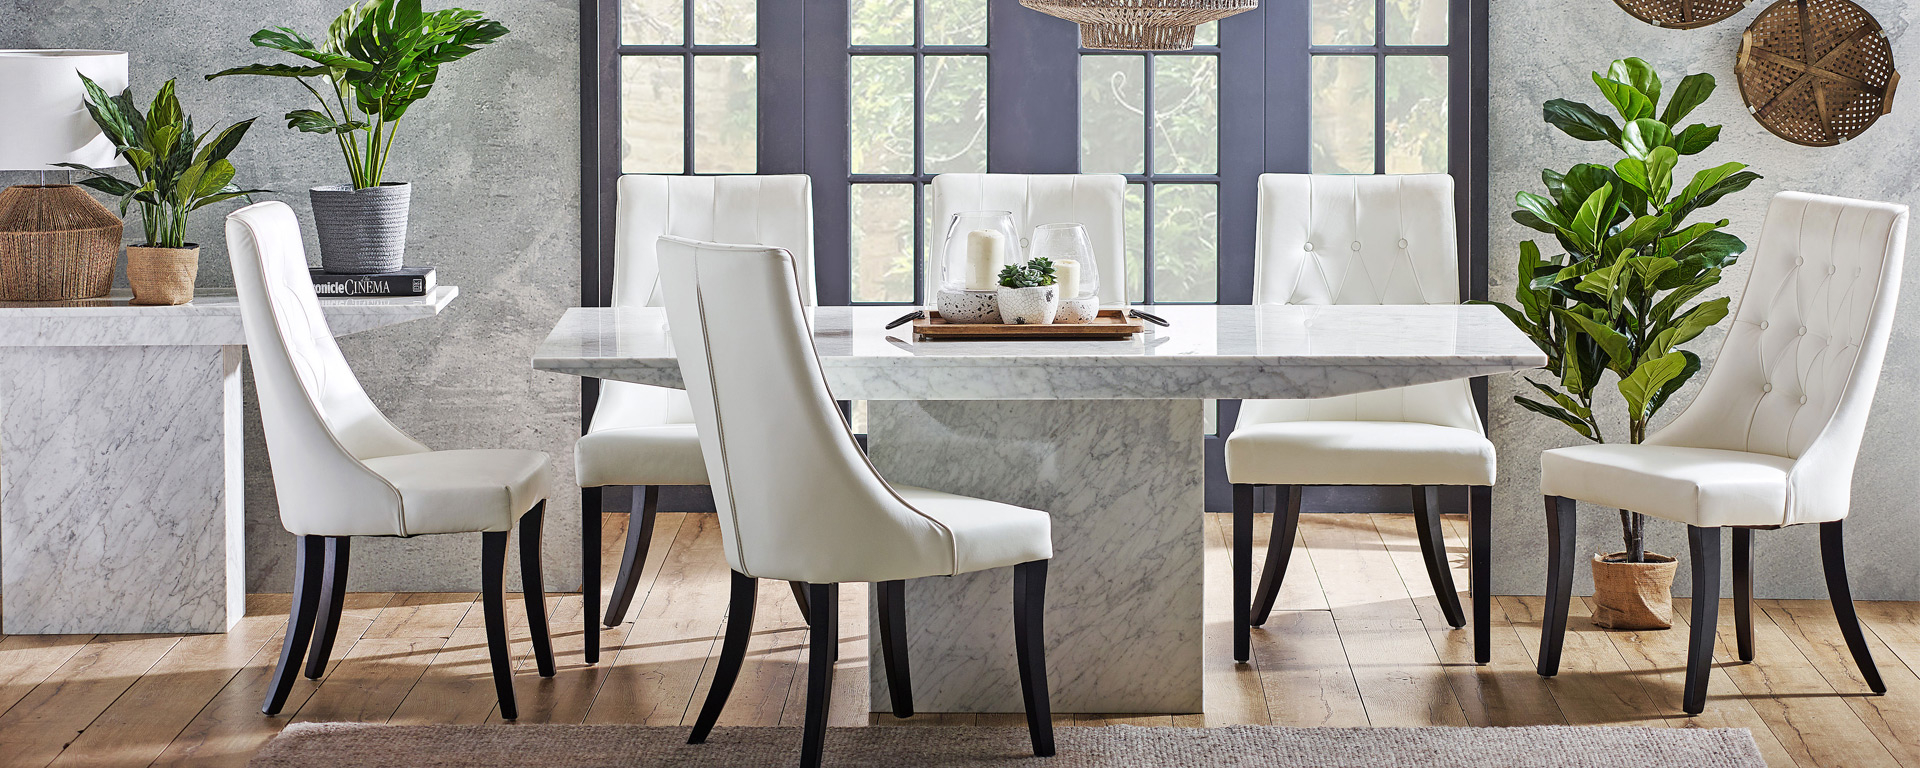 Dining Room Goals 5 Trending Concrete And Stone Dining intended for dimensions 1920 X 768